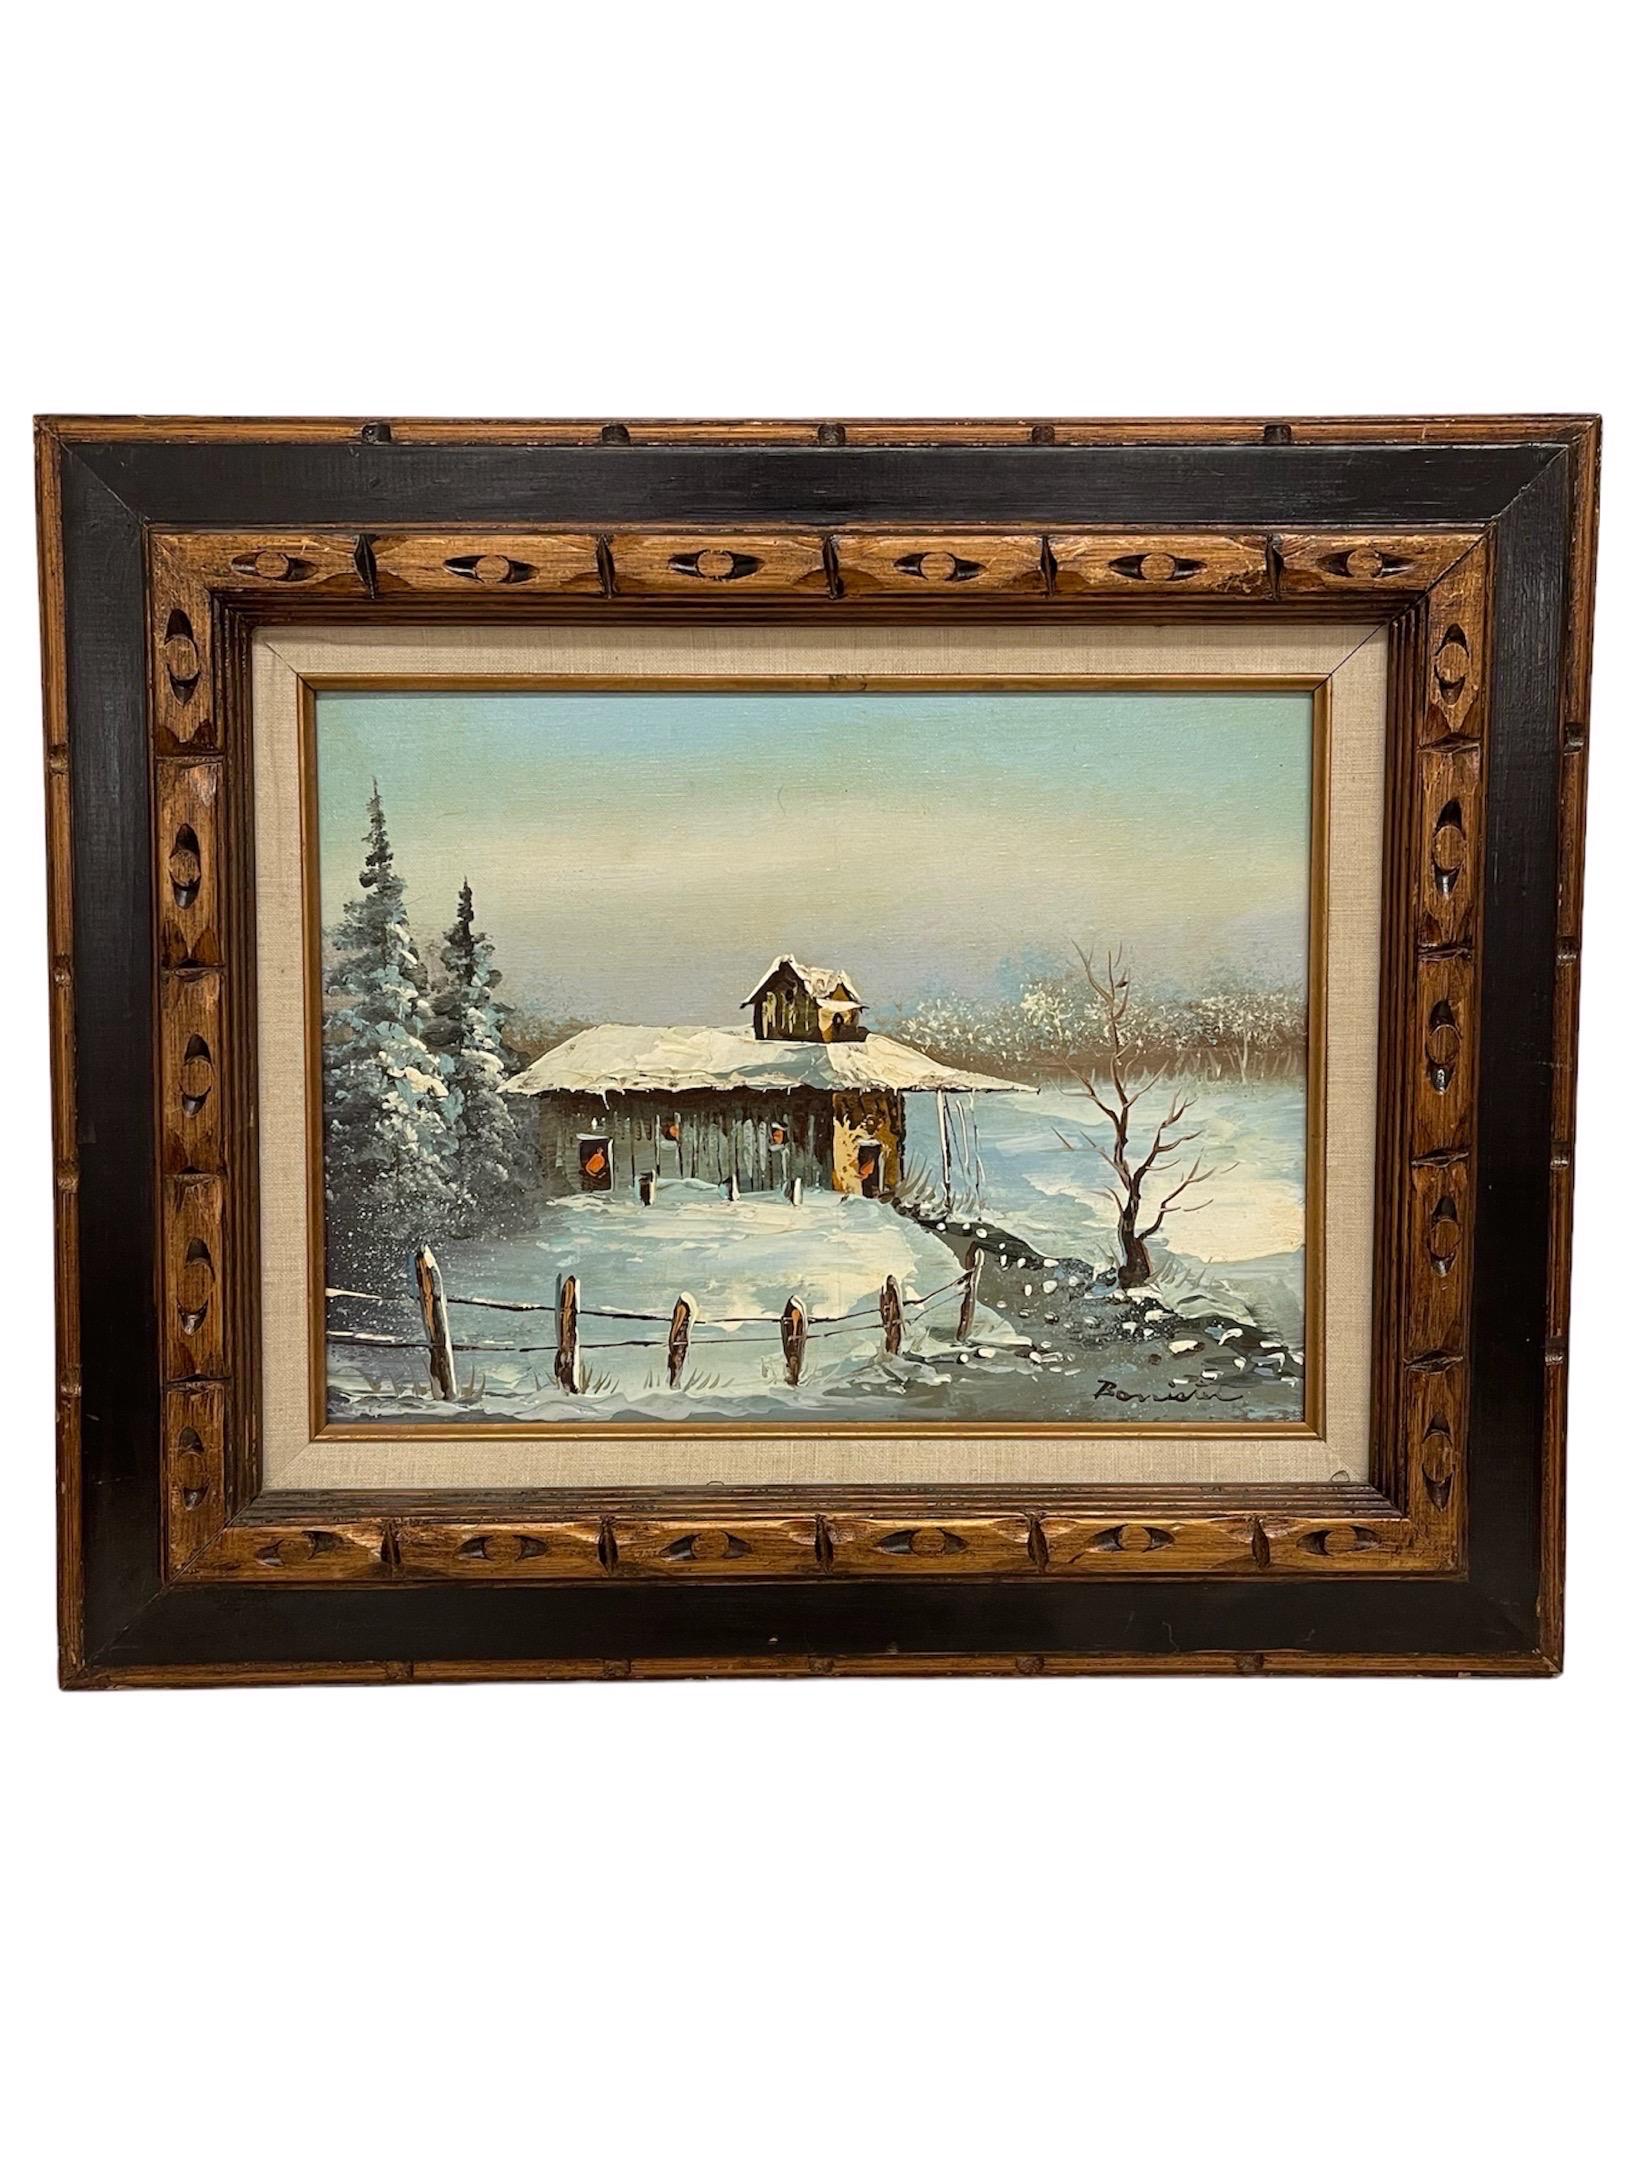 Vintage signed painting of winter cabin on canvas.

Dimensions. 23 1/2 W ; 19 1/2 H.